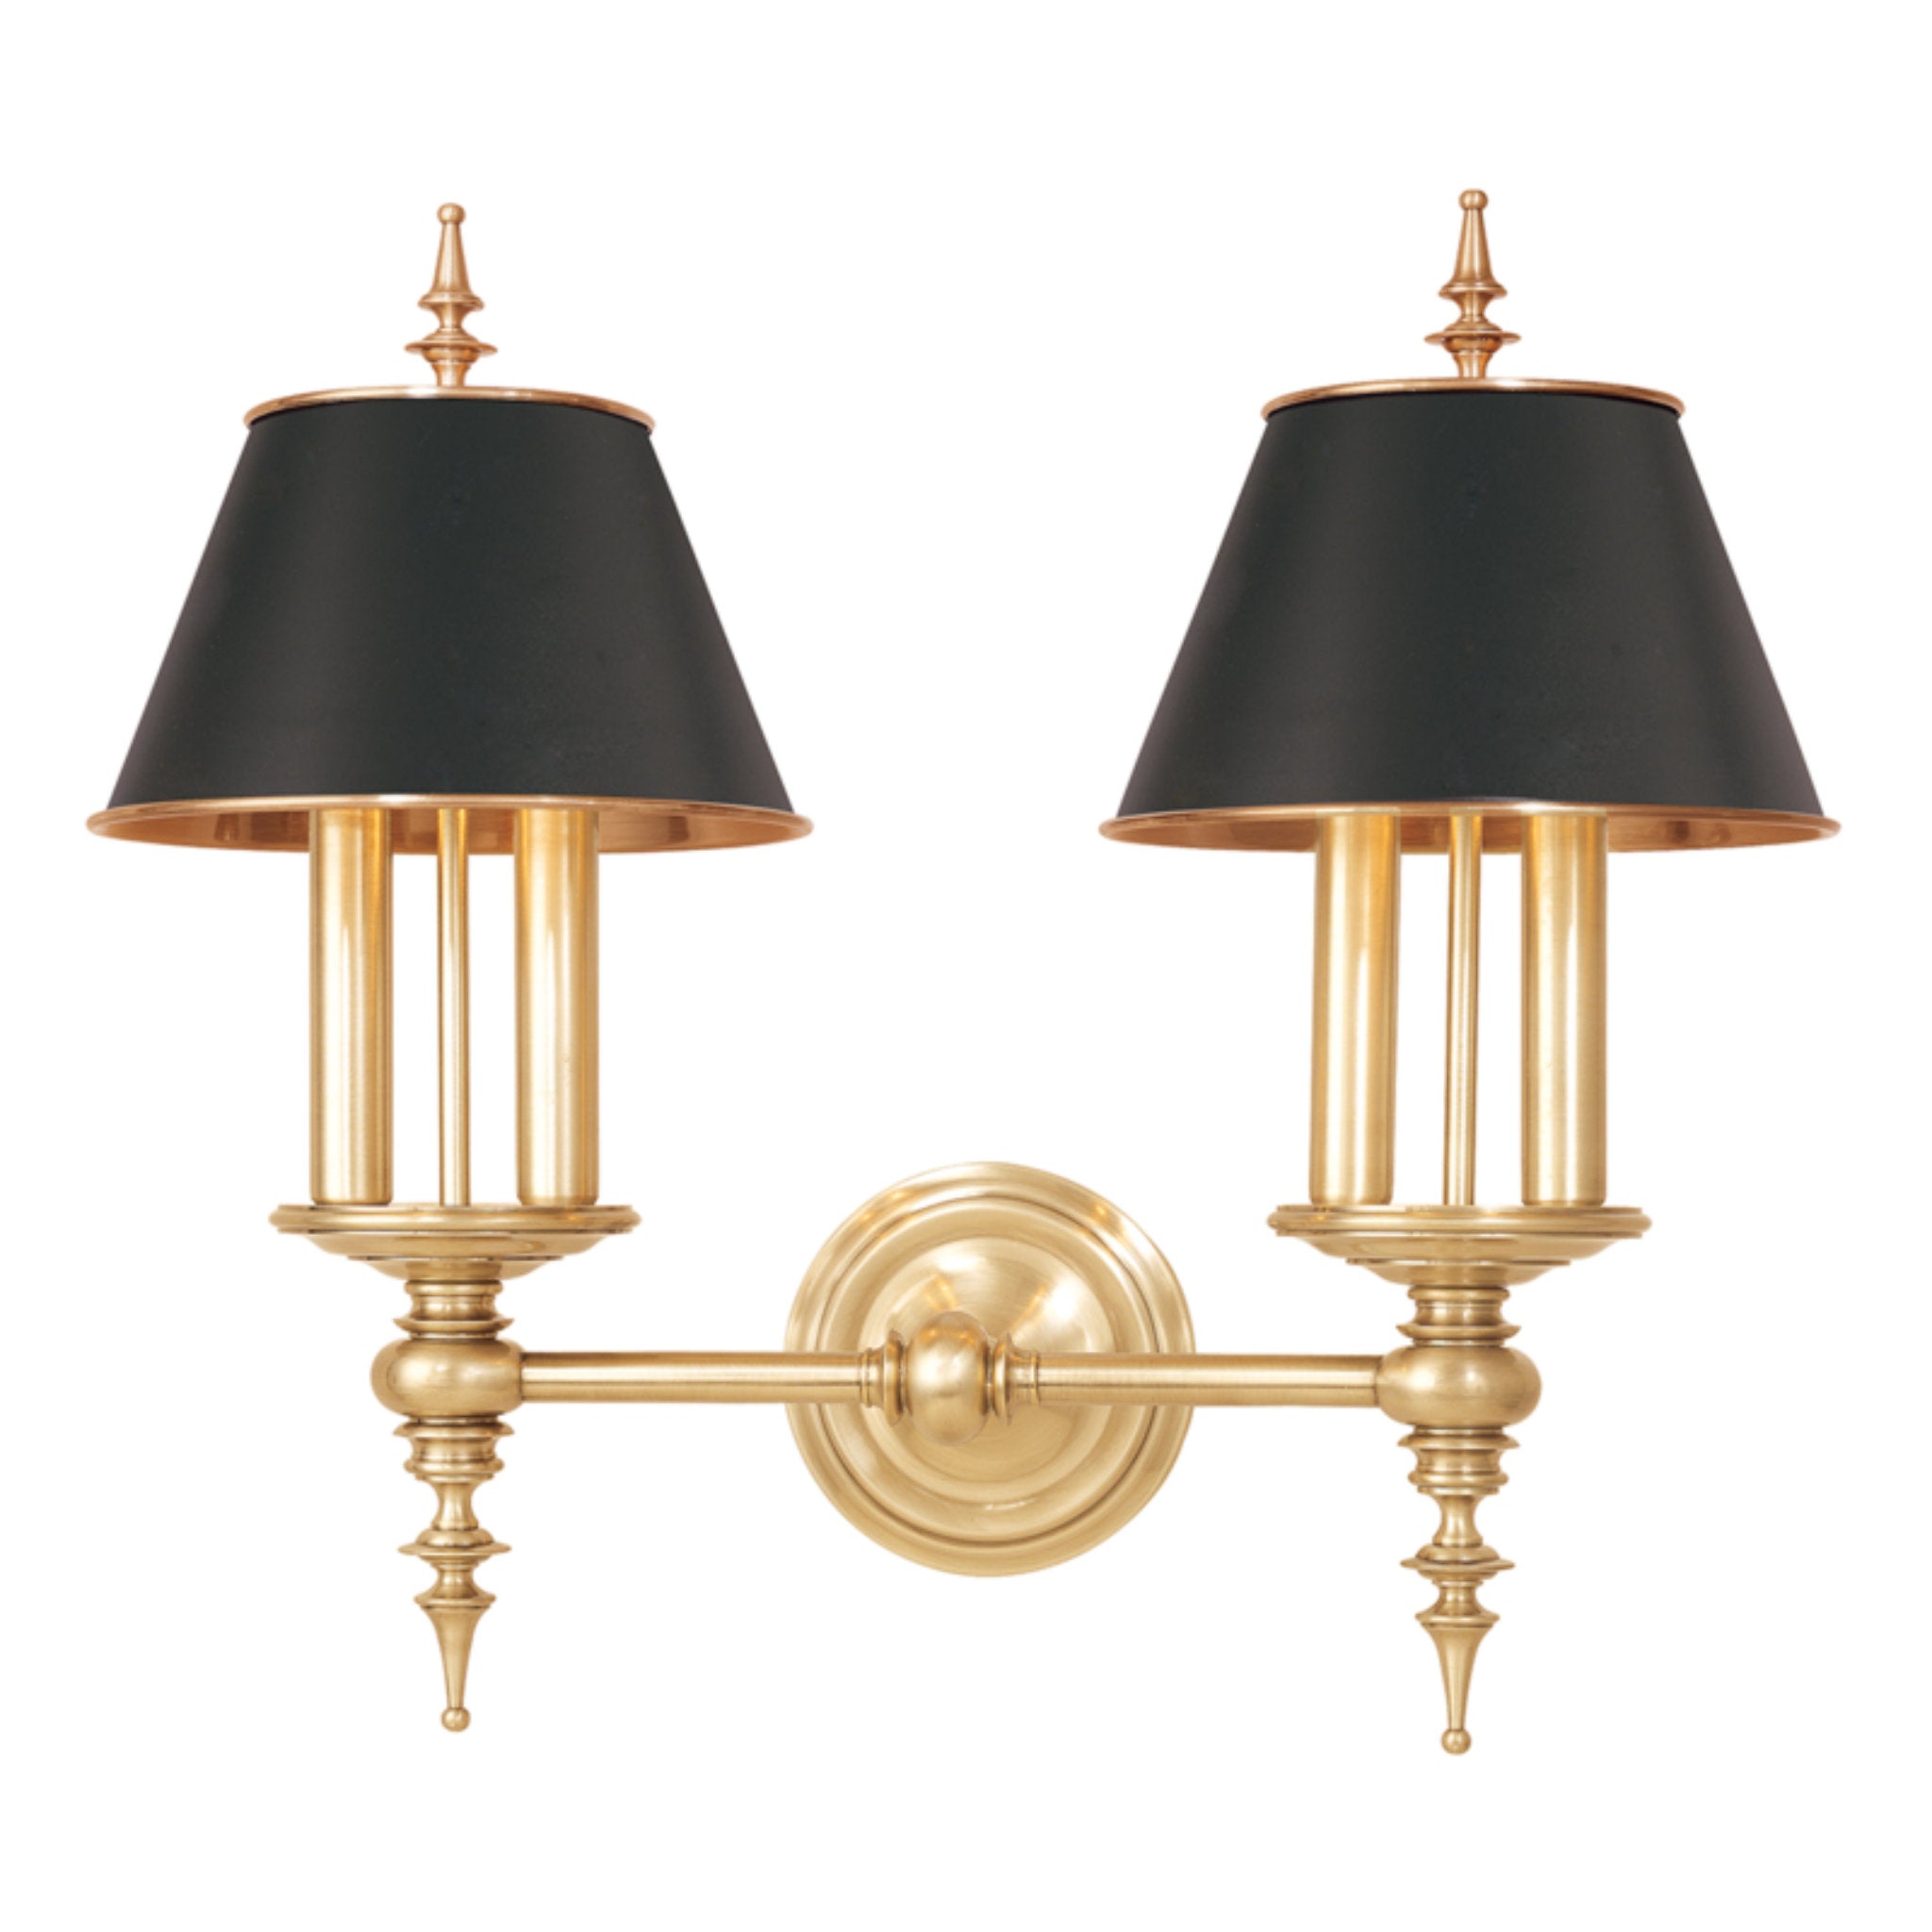 Cheshire 4 Light Wall Sconce in Aged Brass